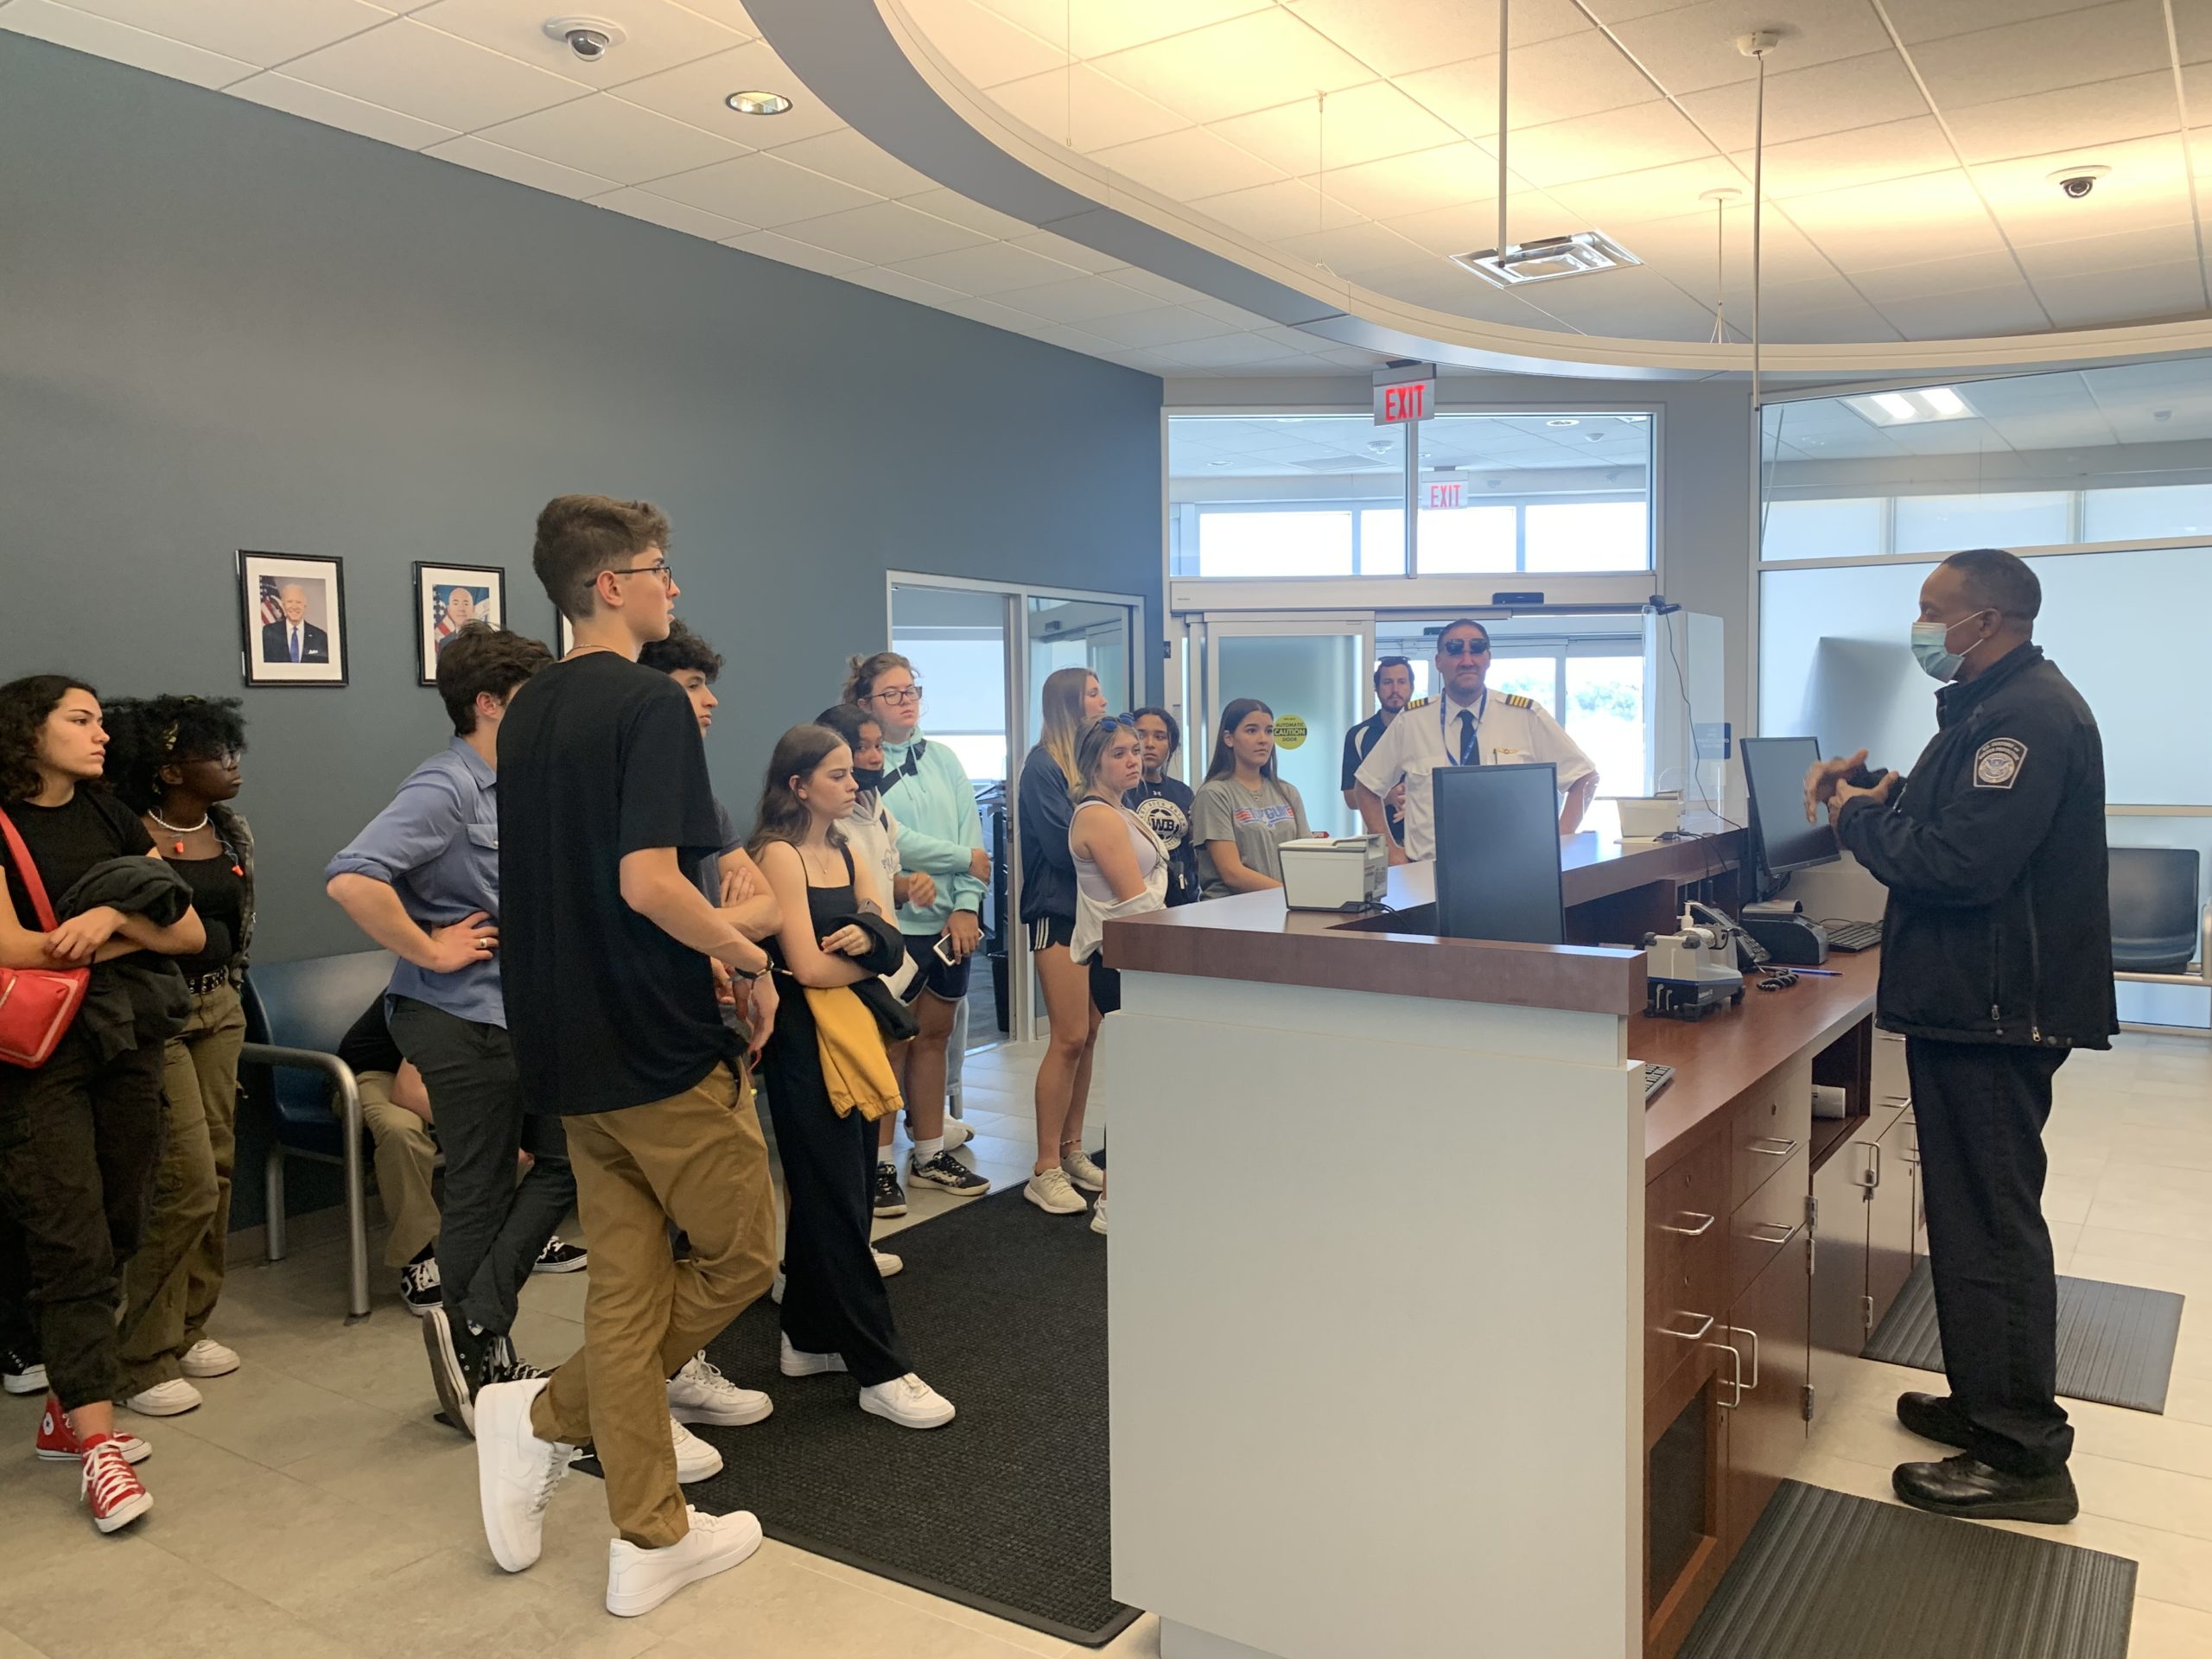 West Boca Raton High School Reaches New Heights with BCT Tour Boca